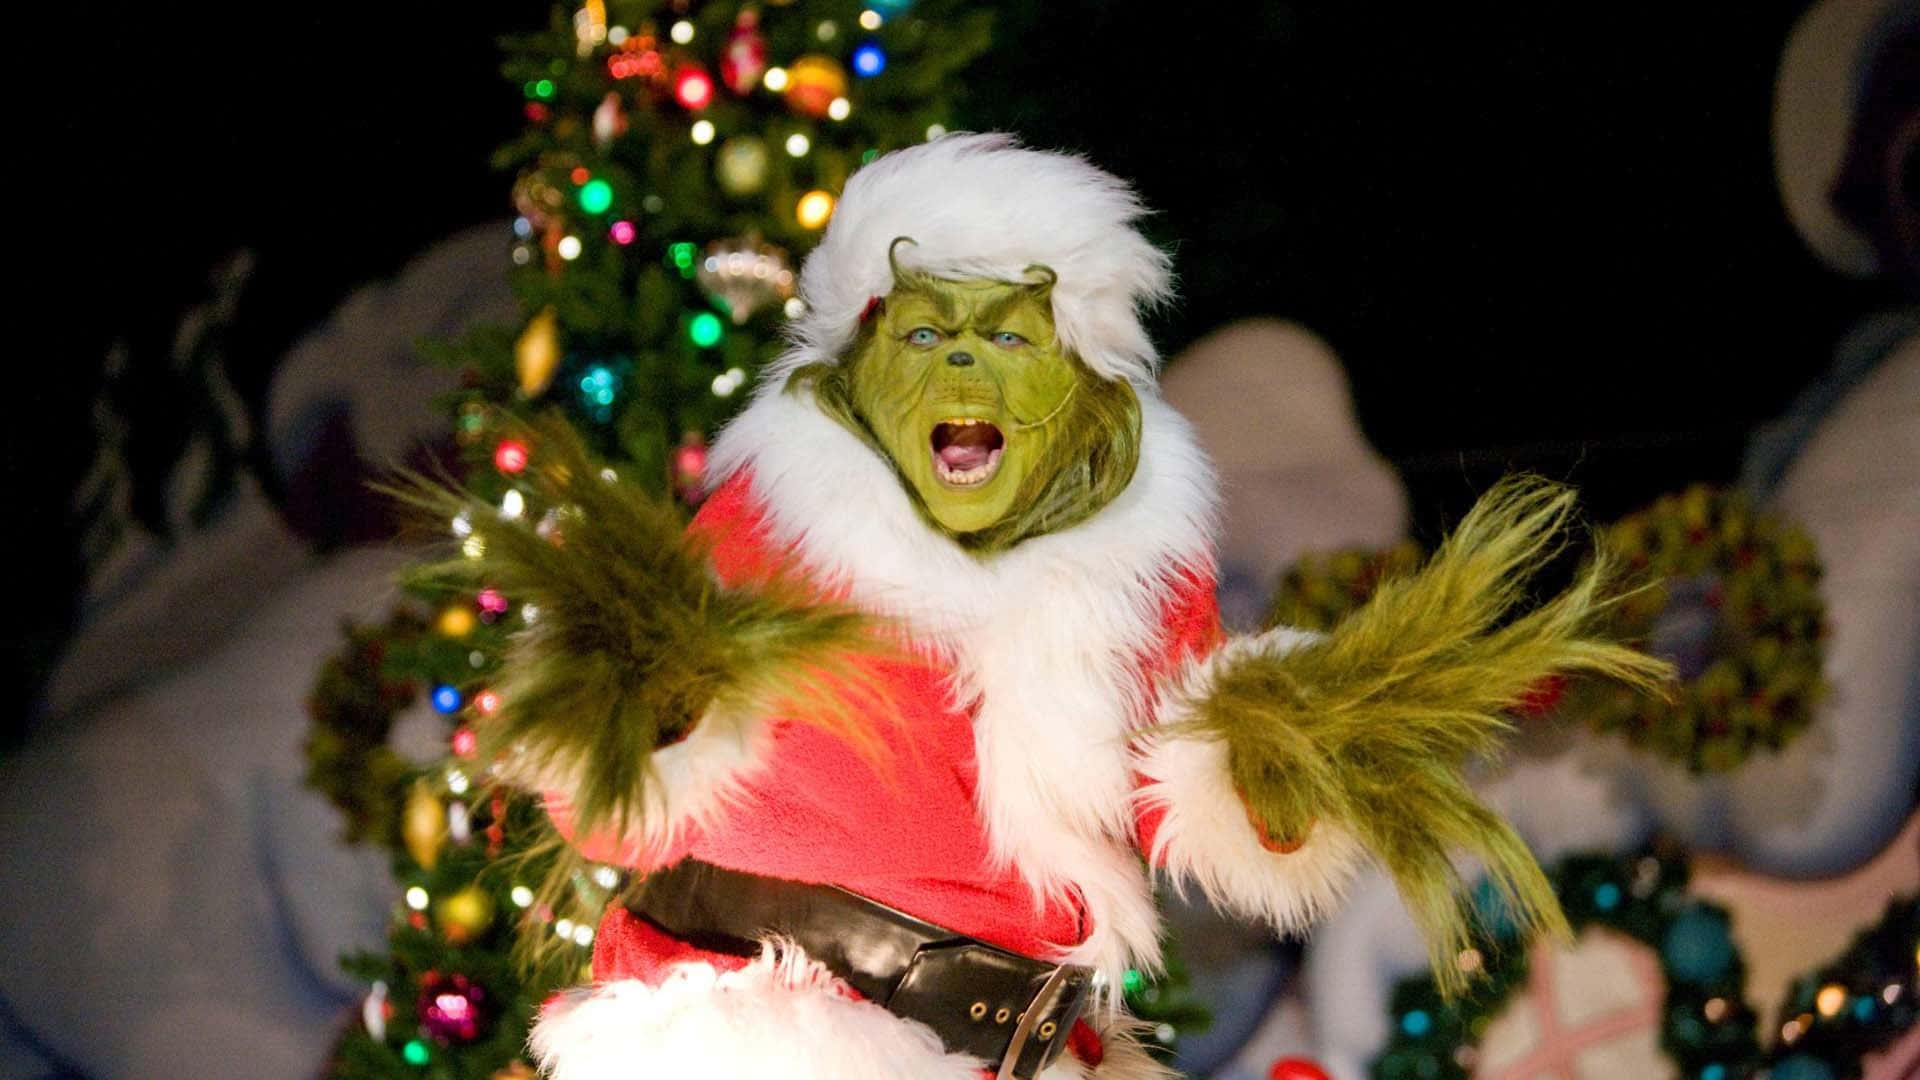 Image  The Grinch Stealing Christmas